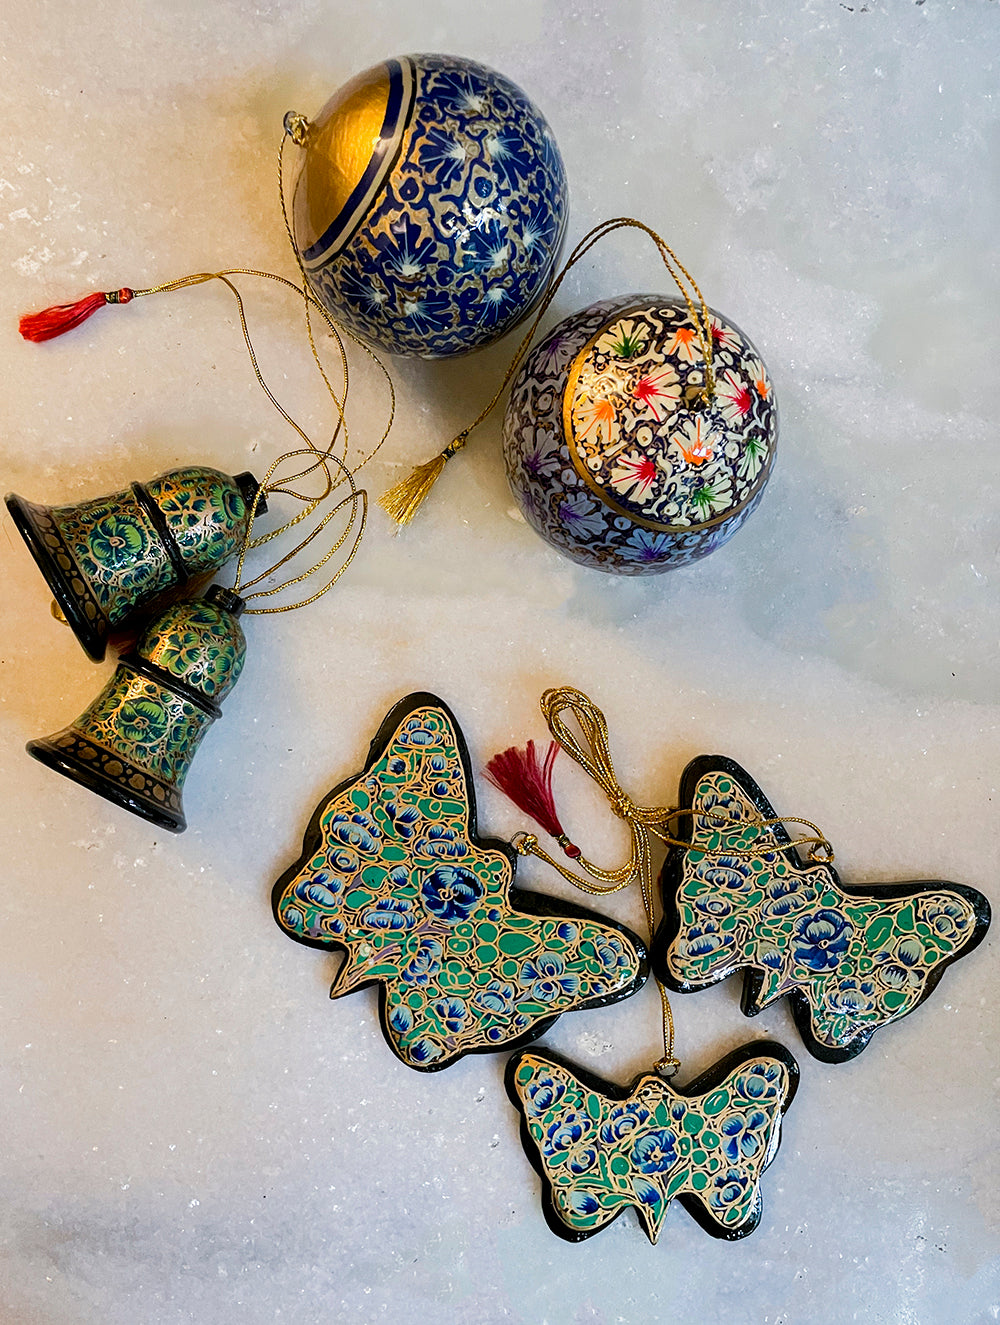 Load image into Gallery viewer, Kashmiri Art Xmas Decorations - Set of 7 (3 Butterflies, 2 Baubles, 2 Bells)